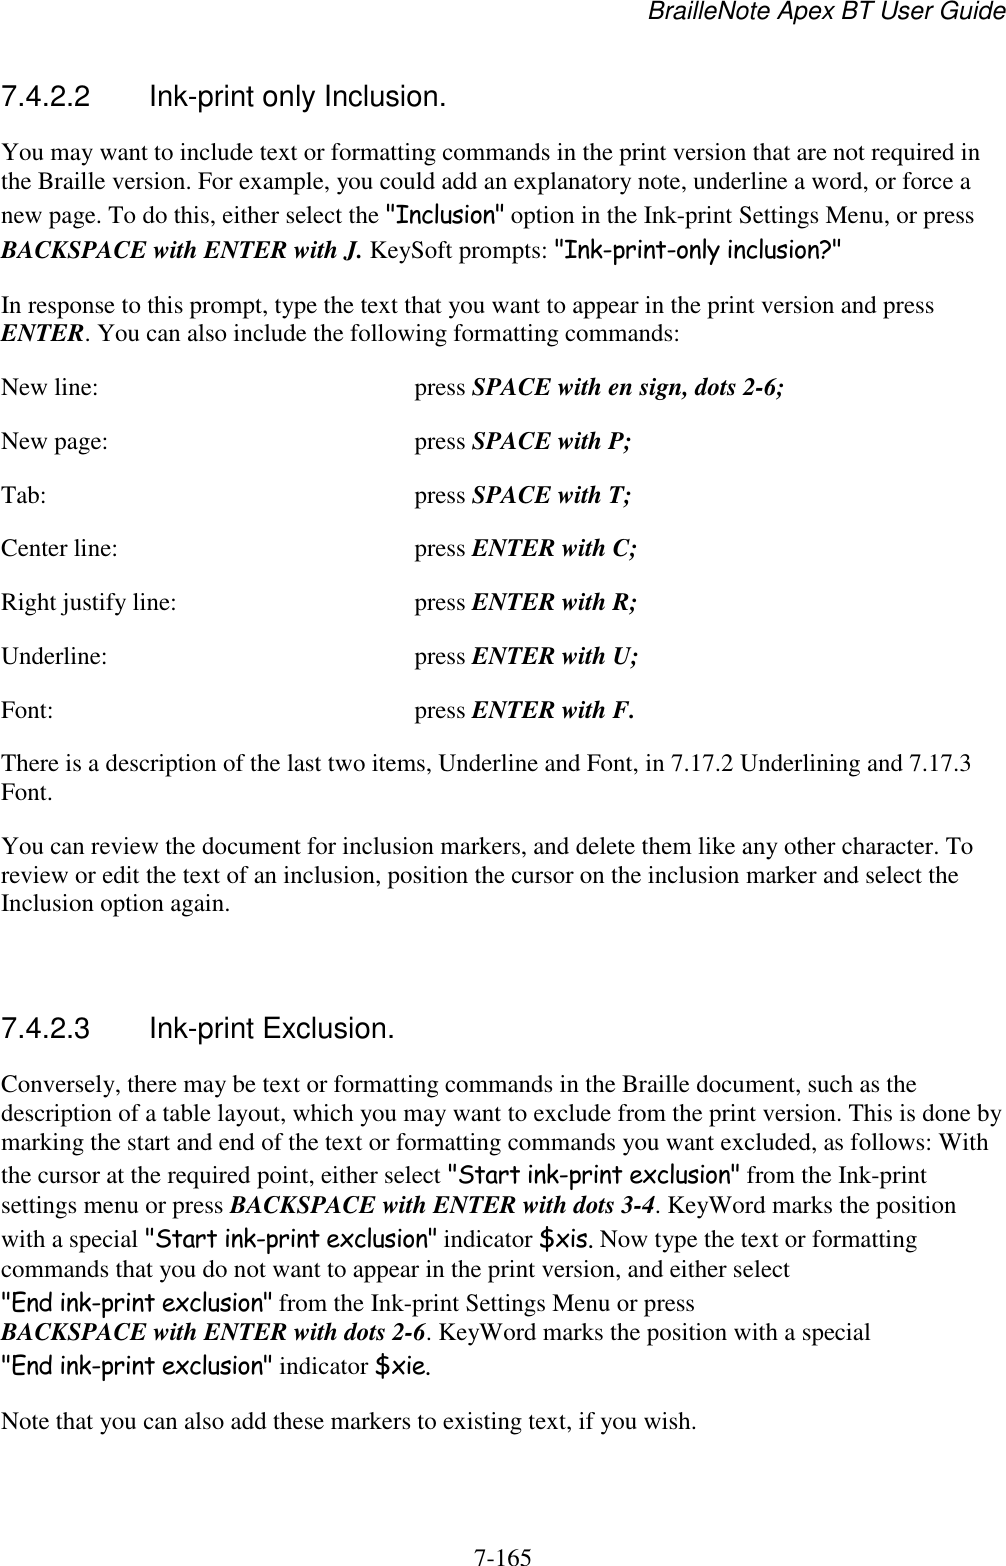 BrailleNote Apex BT User Guide   7-165   7.4.2.2  Ink-print only Inclusion. You may want to include text or formatting commands in the print version that are not required in the Braille version. For example, you could add an explanatory note, underline a word, or force a new page. To do this, either select the &quot;Inclusion&quot; option in the Ink-print Settings Menu, or press BACKSPACE with ENTER with J. KeySoft prompts: &quot;Ink-print-only inclusion?&quot; In response to this prompt, type the text that you want to appear in the print version and press ENTER. You can also include the following formatting commands: New line:  press SPACE with en sign, dots 2-6; New page:  press SPACE with P; Tab:  press SPACE with T; Center line:  press ENTER with C; Right justify line:  press ENTER with R; Underline:  press ENTER with U; Font:  press ENTER with F. There is a description of the last two items, Underline and Font, in 7.17.2 Underlining and 7.17.3 Font. You can review the document for inclusion markers, and delete them like any other character. To review or edit the text of an inclusion, position the cursor on the inclusion marker and select the Inclusion option again.   7.4.2.3  Ink-print Exclusion. Conversely, there may be text or formatting commands in the Braille document, such as the description of a table layout, which you may want to exclude from the print version. This is done by marking the start and end of the text or formatting commands you want excluded, as follows: With the cursor at the required point, either select &quot;Start ink-print exclusion&quot; from the Ink-print settings menu or press BACKSPACE with ENTER with dots 3-4. KeyWord marks the position with a special &quot;Start ink-print exclusion&quot; indicator $xis. Now type the text or formatting commands that you do not want to appear in the print version, and either select &quot;End ink-print exclusion&quot; from the Ink-print Settings Menu or press BACKSPACE with ENTER with dots 2-6. KeyWord marks the position with a special &quot;End ink-print exclusion&quot; indicator $xie. Note that you can also add these markers to existing text, if you wish.   